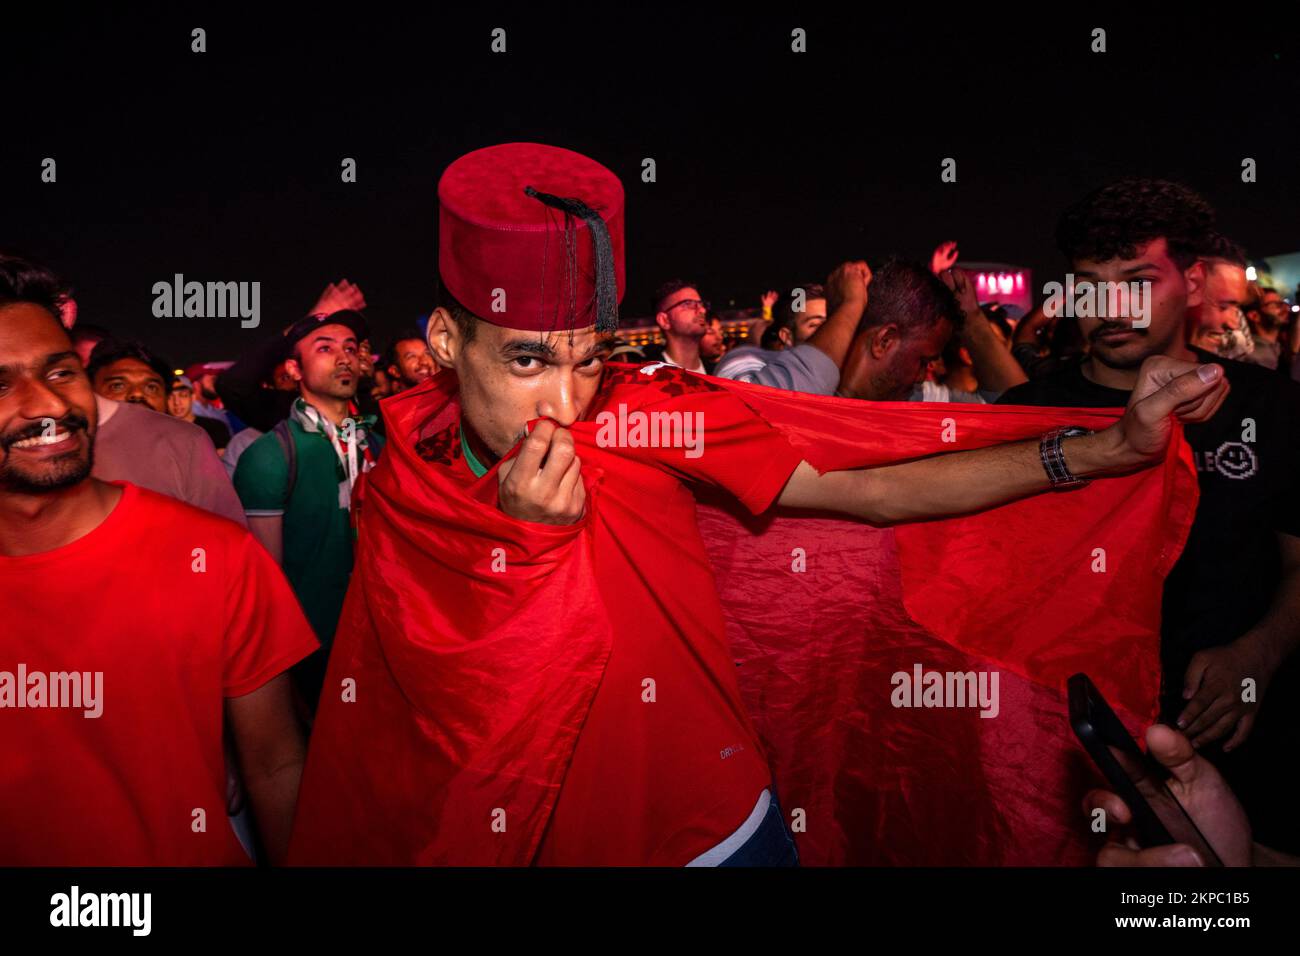 Fans of different teams celebrate and dance together, drinking Budweiser beer, or being Moslem conservative veiled, at the FIFA Fan Festival zone, on the 8th day of the FIFA World Cup Qatar 2022, in Doha, Qatar on November 27, 2022. Photo by Ammar Abd Rabbo/ABACAPRESS.COM Stock Photo